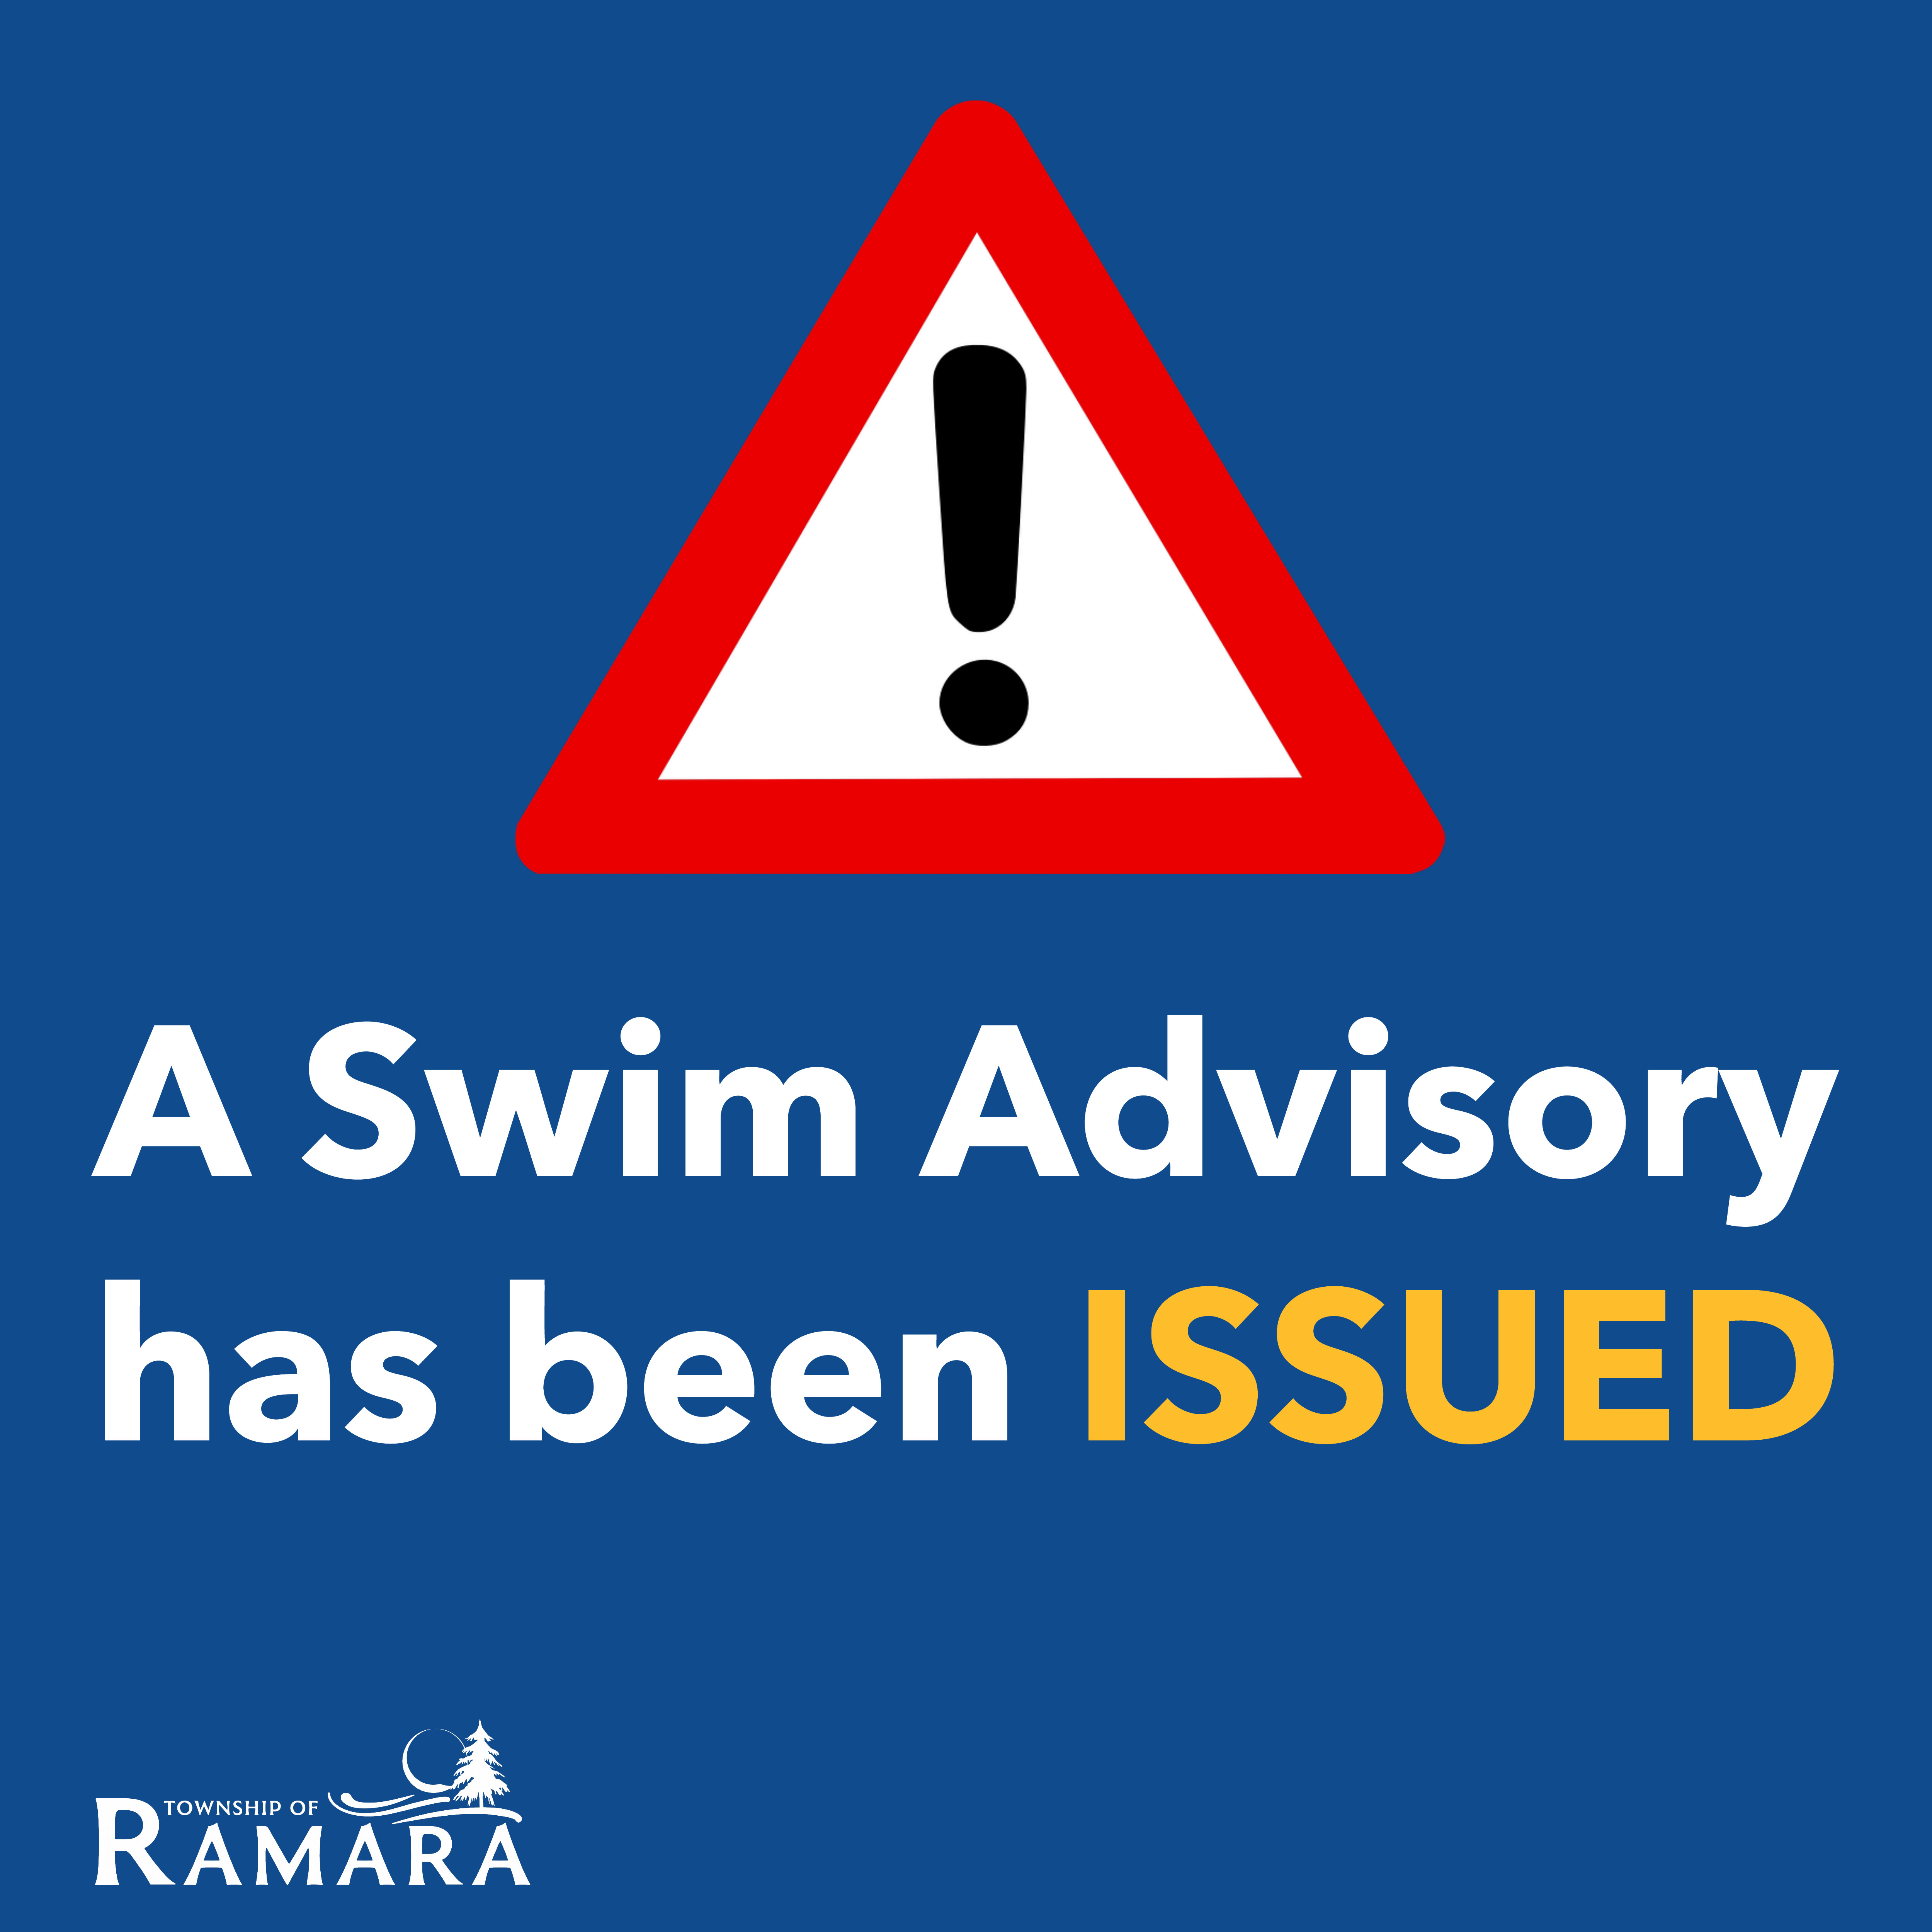 A swim advisory has been issued - wording